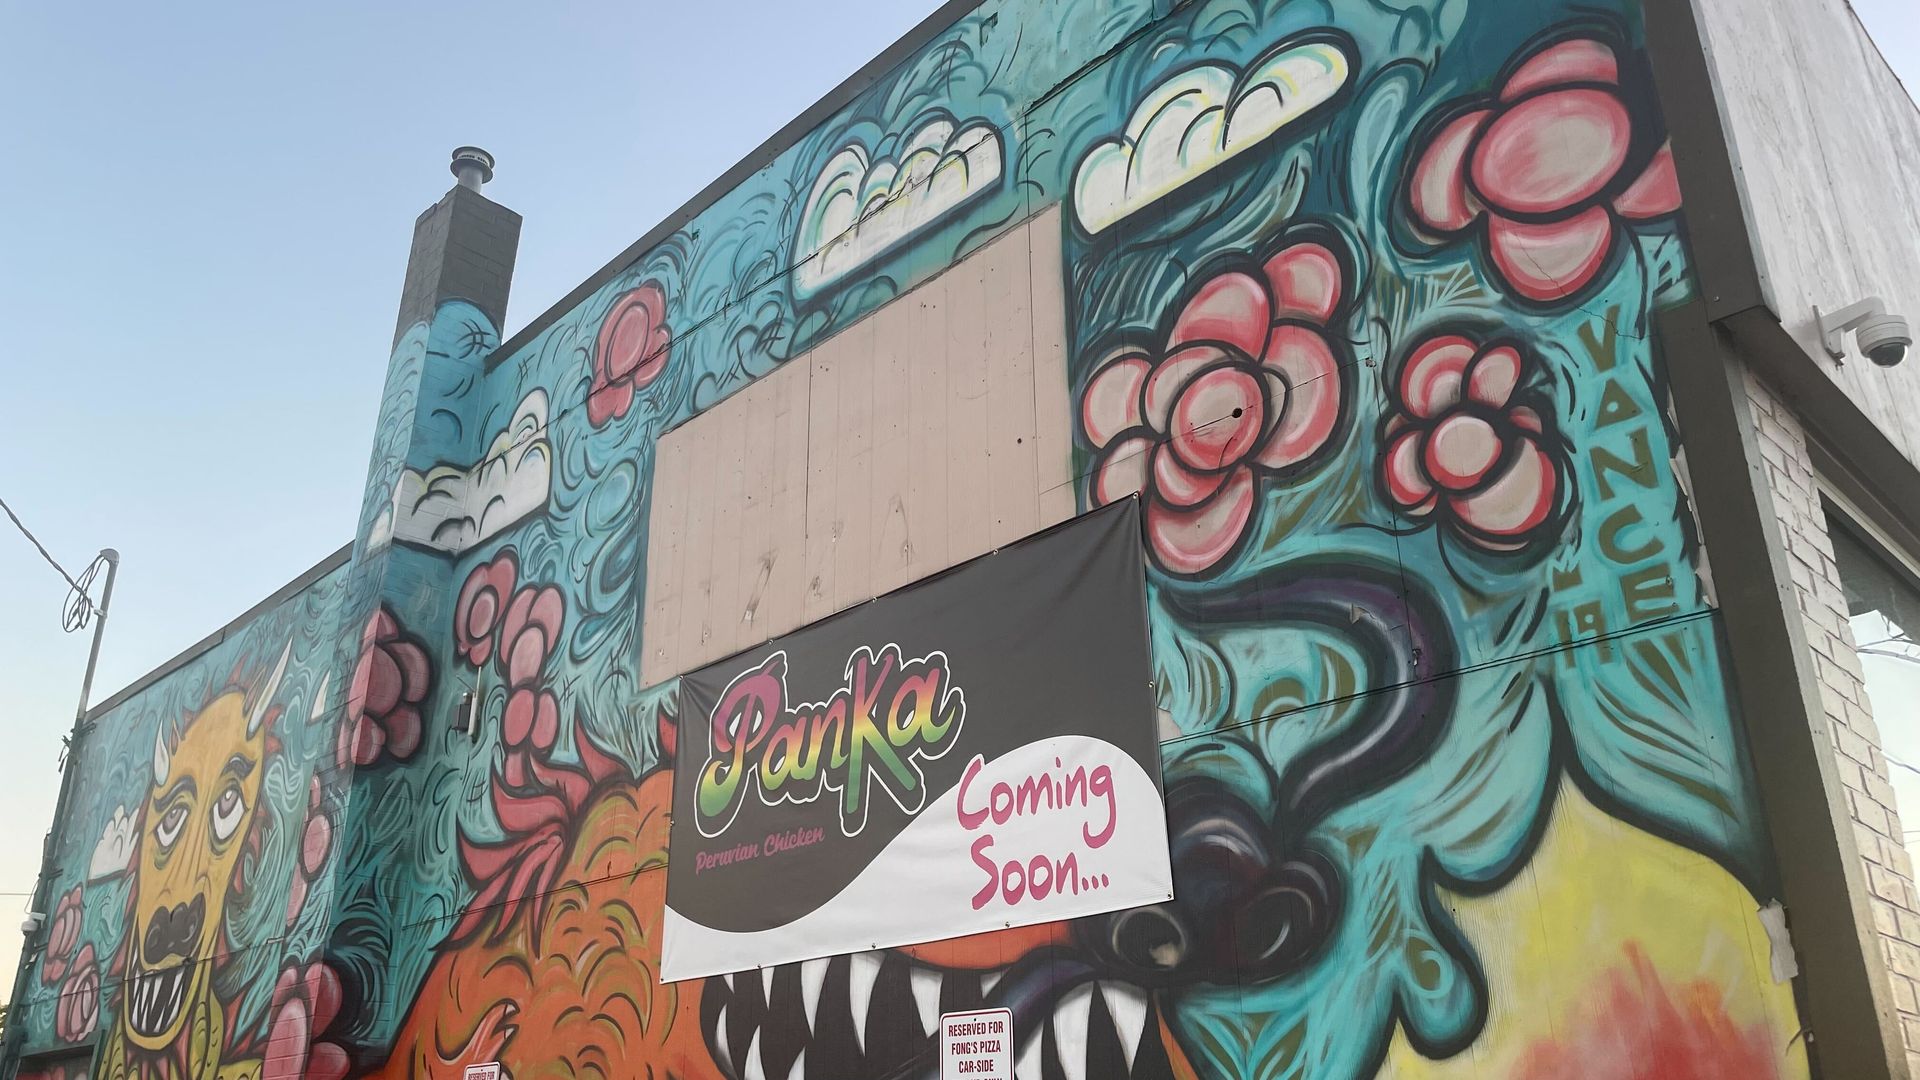 Mural with sign of "Panka: coming soon" on it